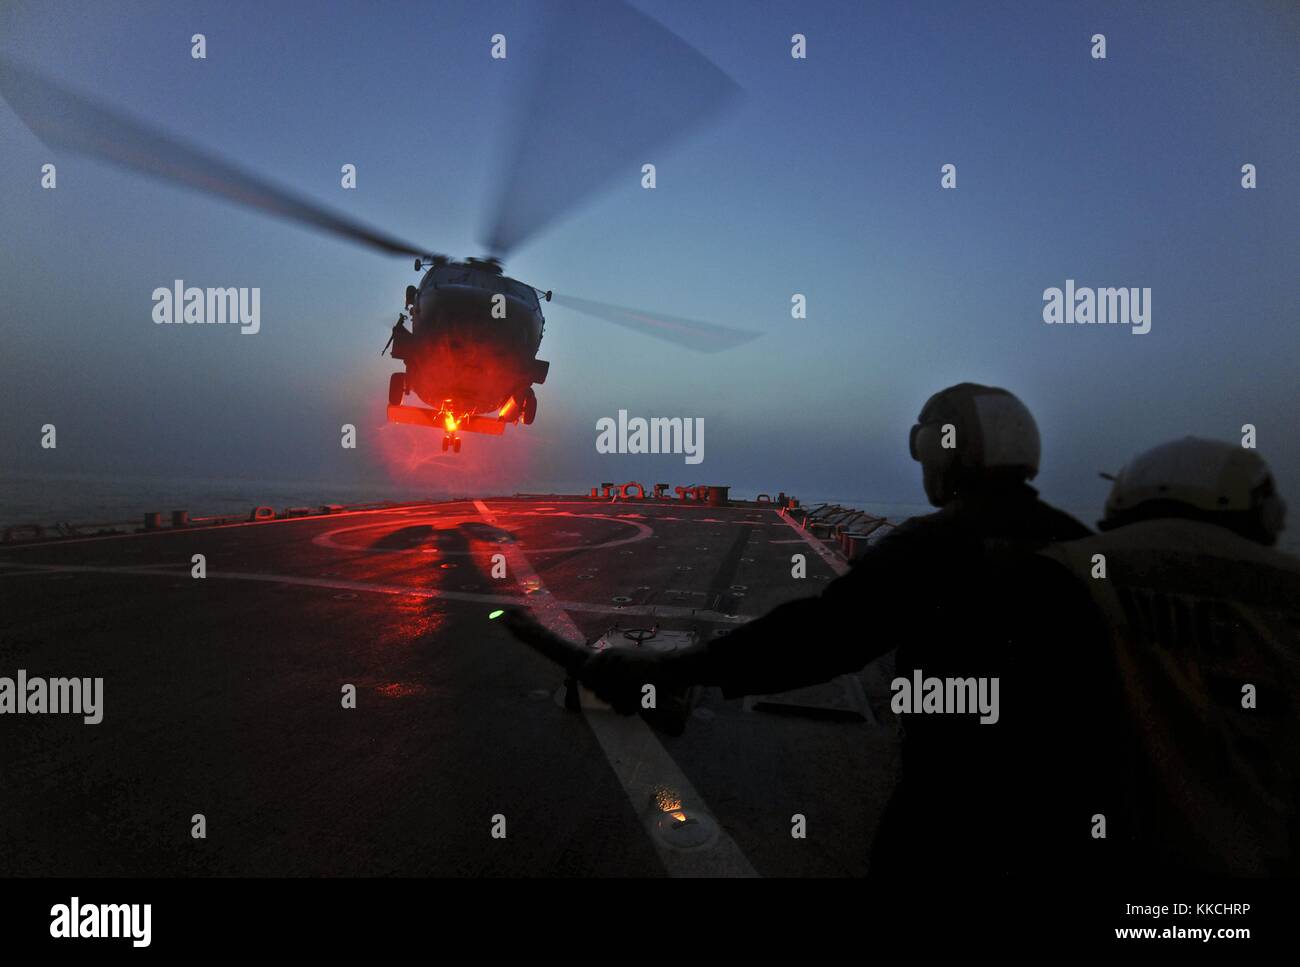 Boatswain's Mate 2nd Class Leon Simmons, assigned to the guided-missile destroyer USS Porter DDG 78, signals to an SH-60B Sea Hawk helicopter during deck-landing qualifications, 120519-N-Wo496-007 Arabian Gulf. Image courtesy U.S. Navy Photo by Mass Communication Specialist 3rd Class Alex R. Forster/US Navy. 2012. Stock Photo